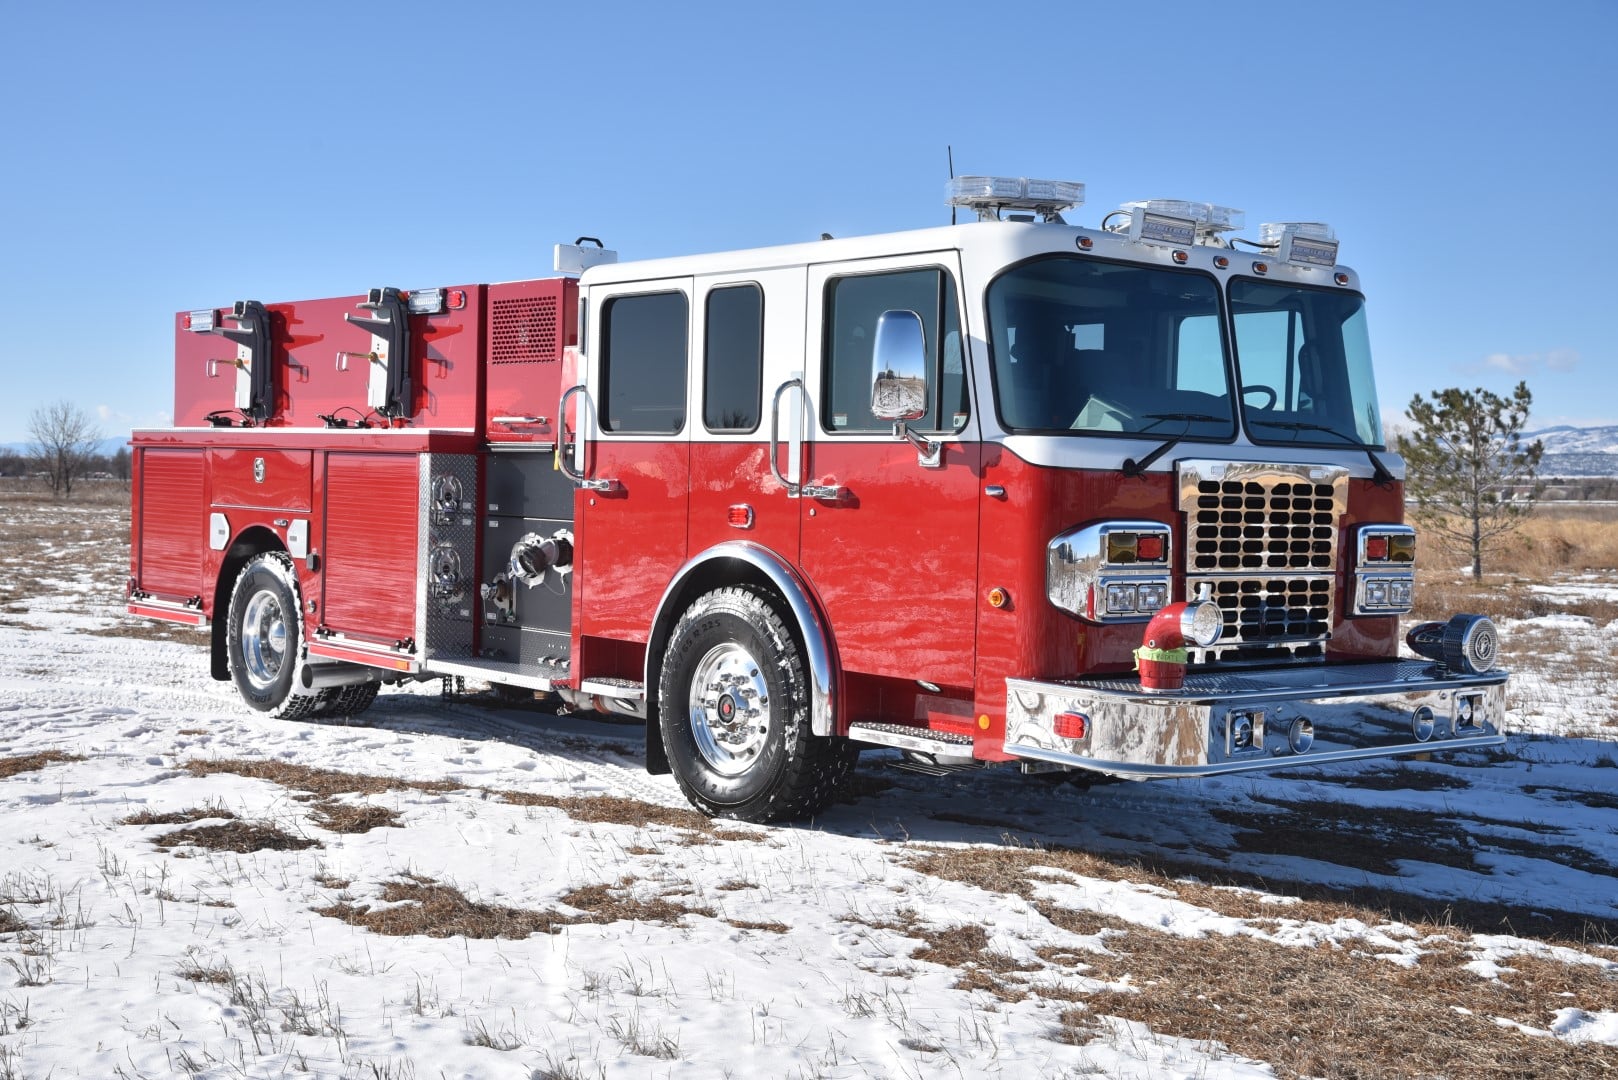 Featured image for “Central Nyack, NY Fire Department Rescue Pumper #1022”